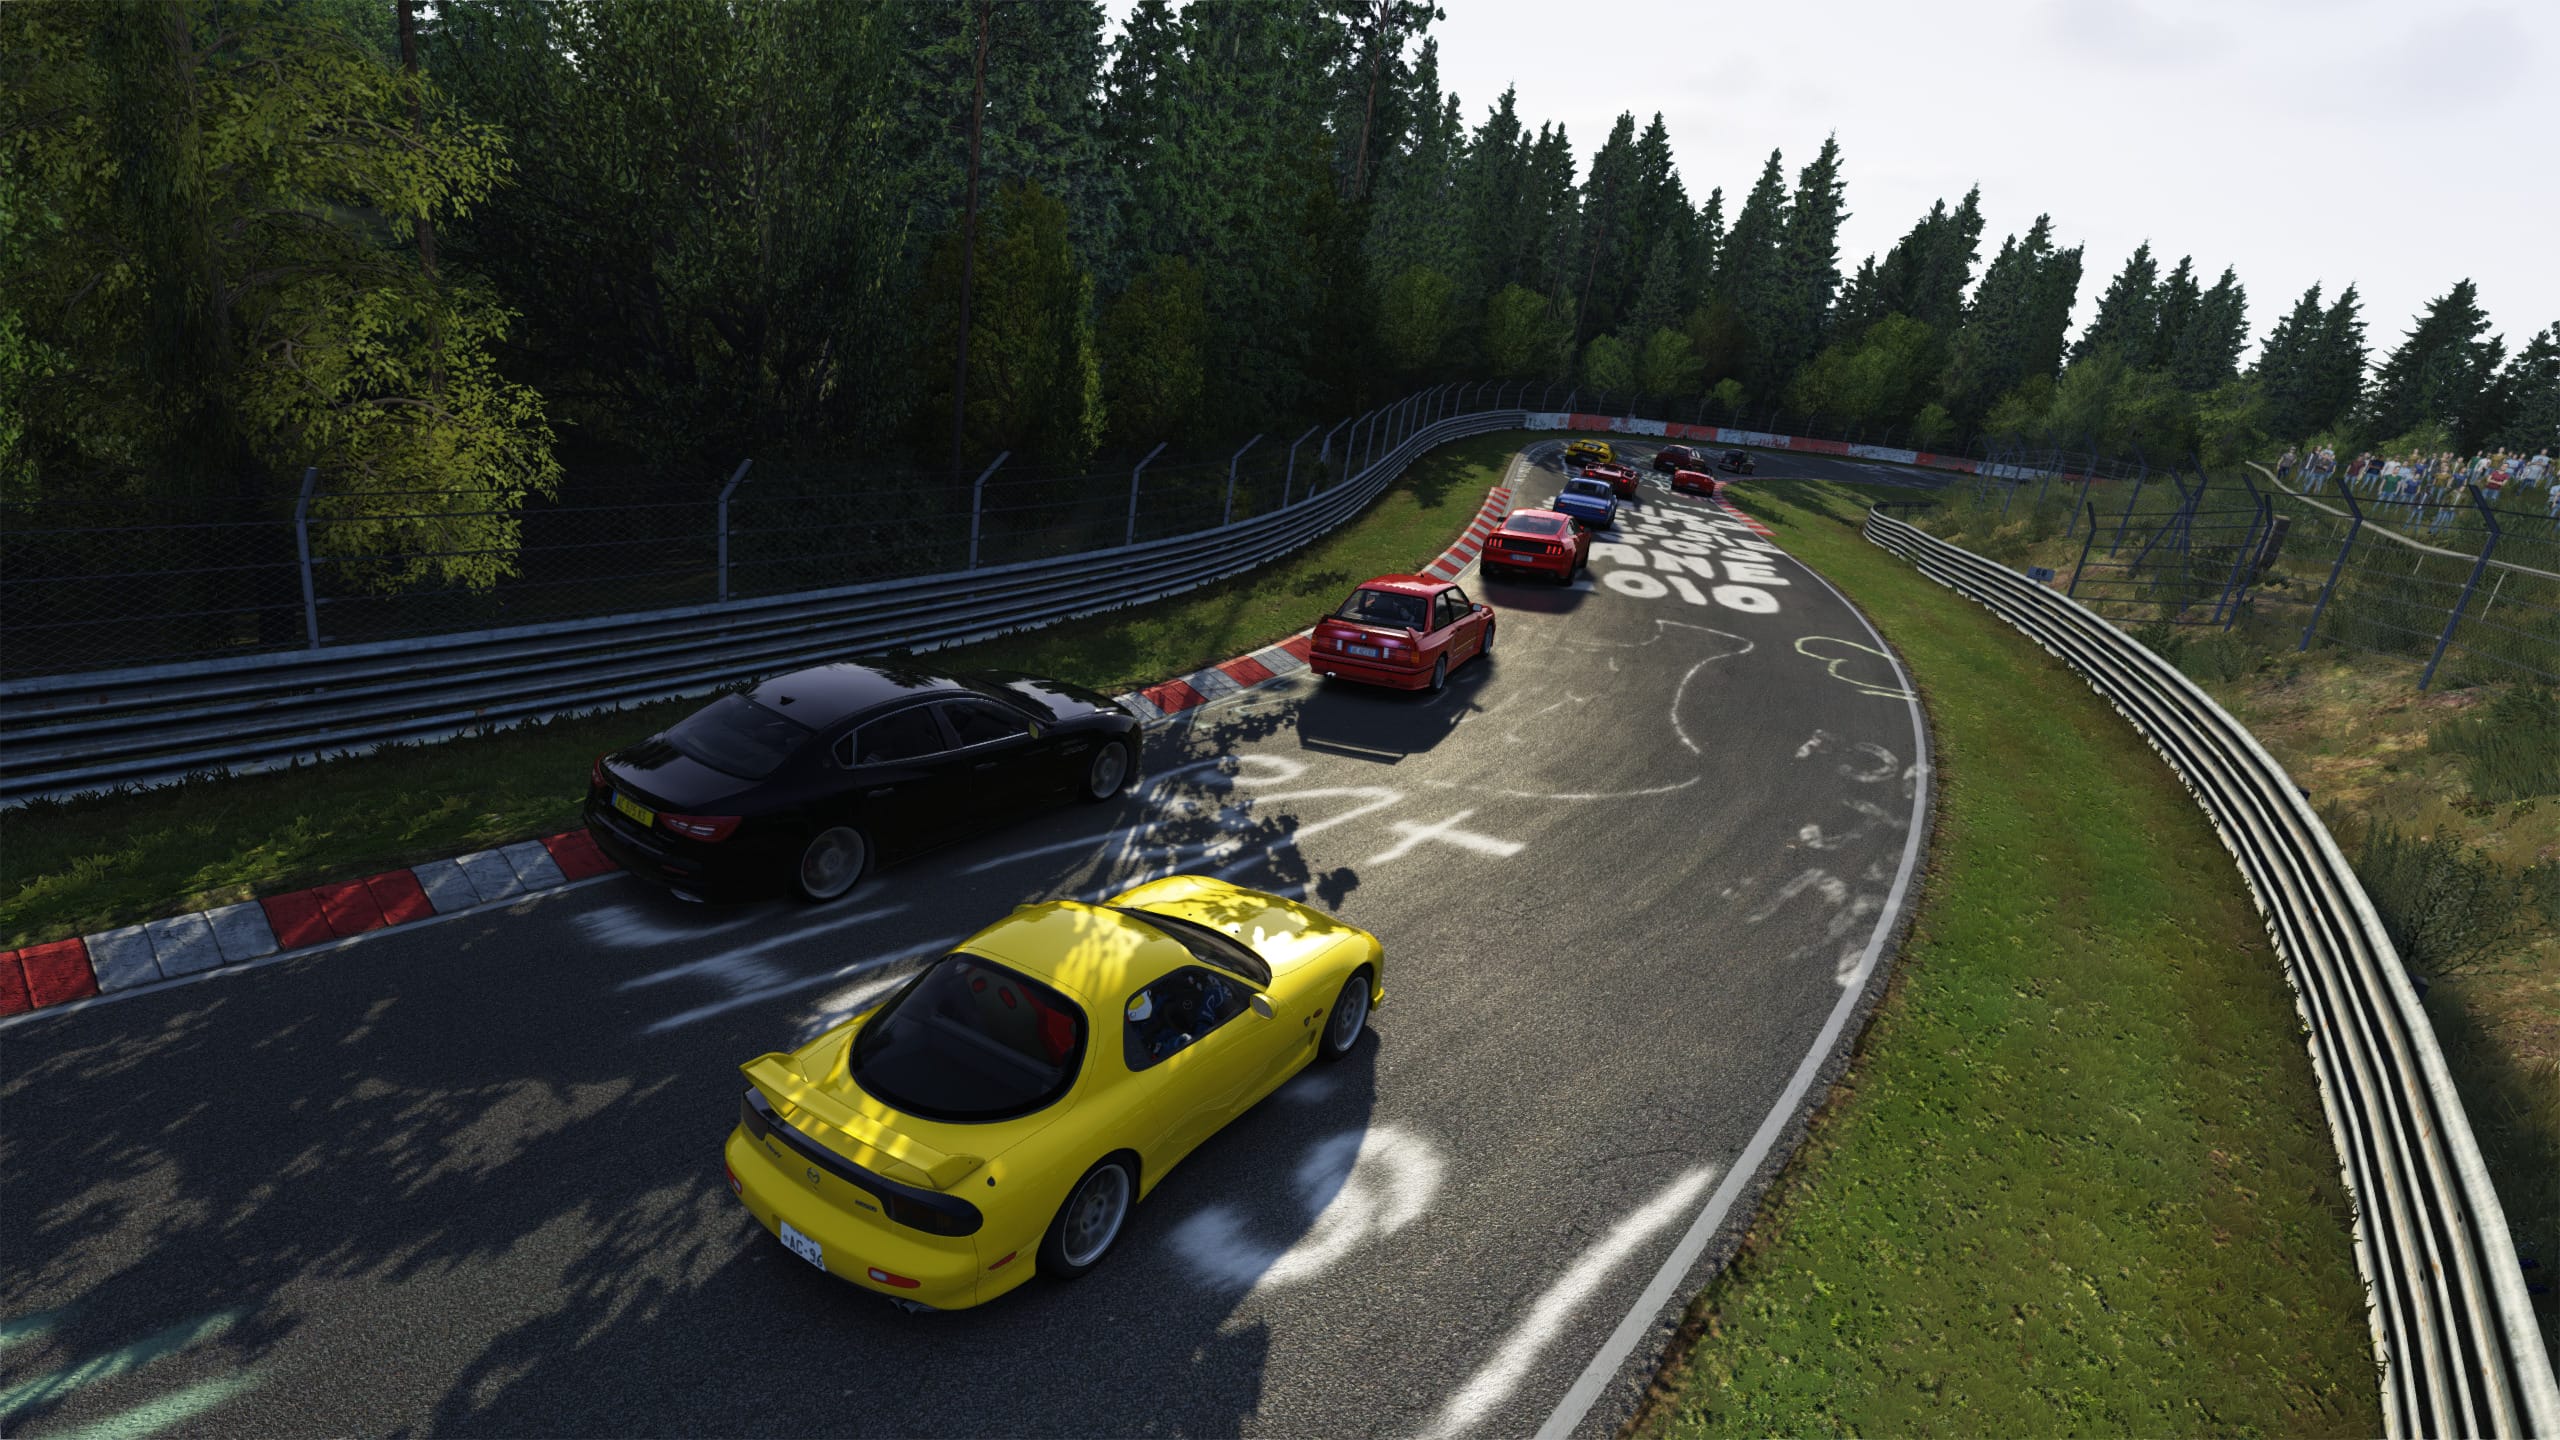 AC Nordschleife with cars